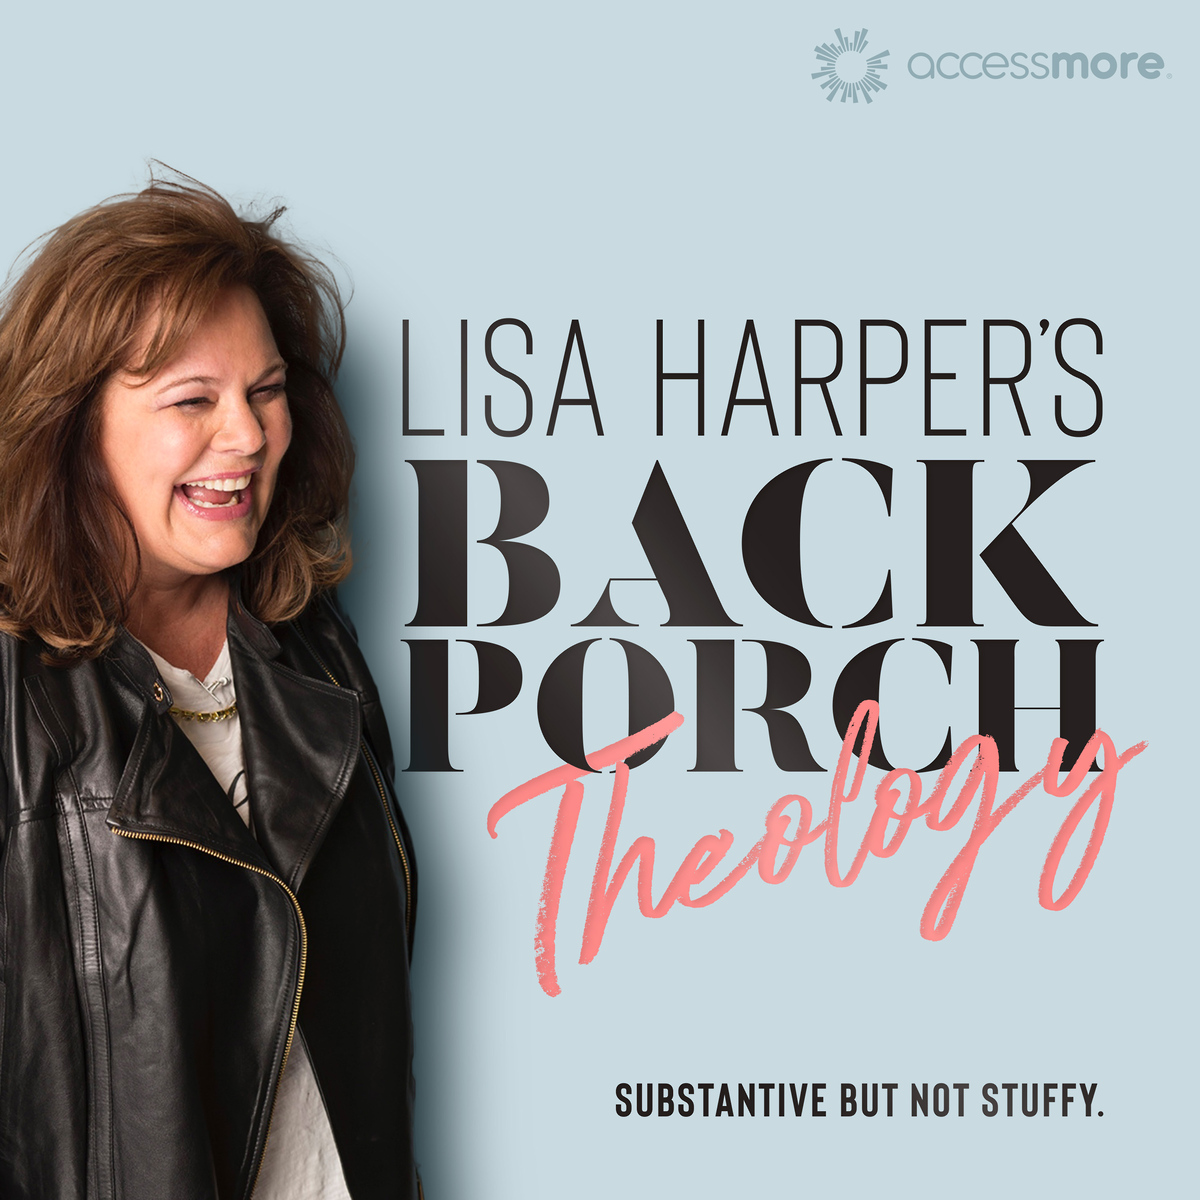 Introduction to Lisa Harper's Back Porch Theology